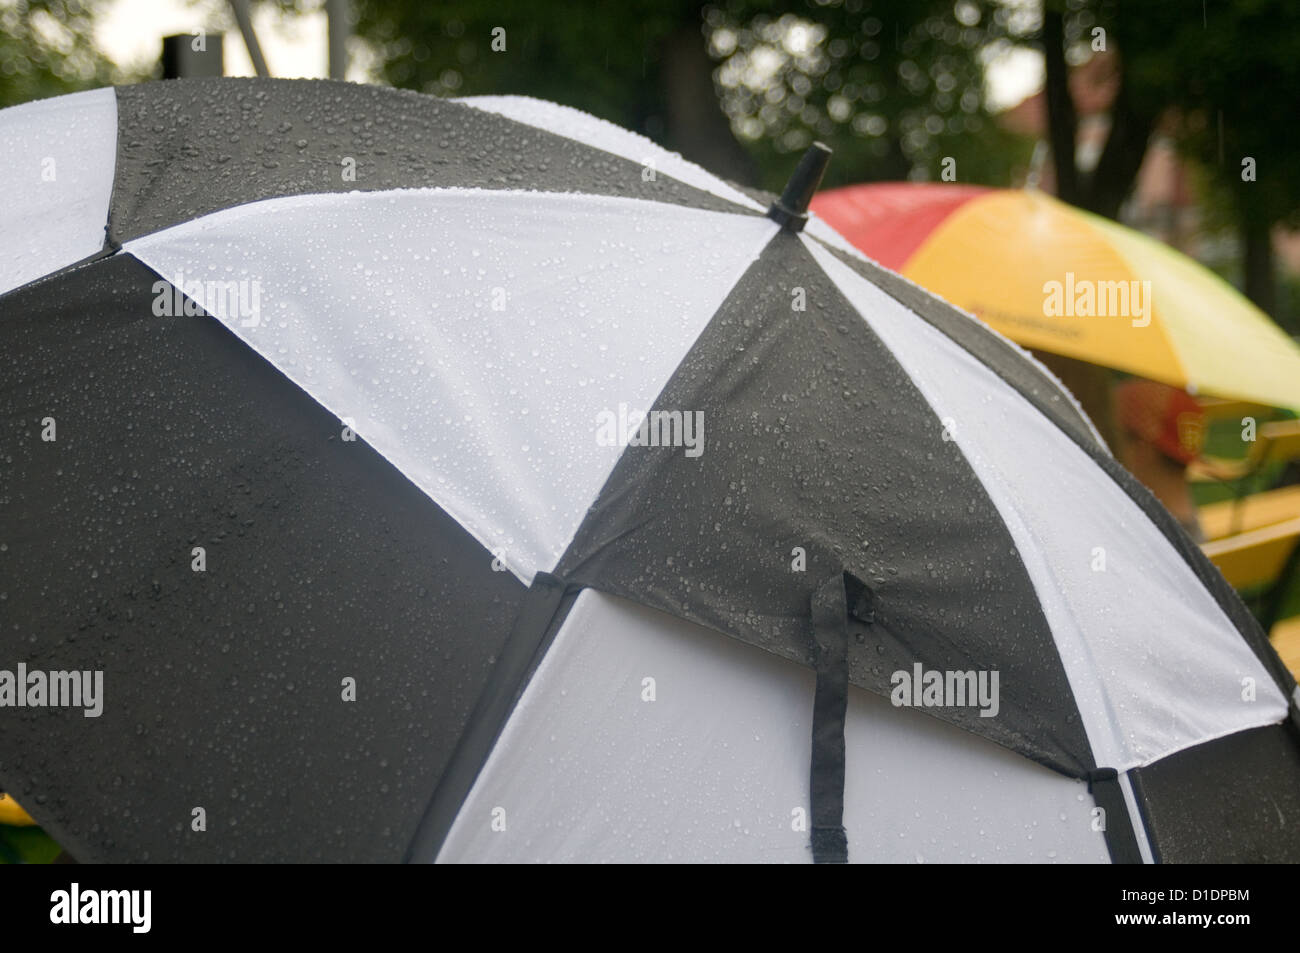 wet summer umbrella umbrellas British soggy rain raining rained event events weather bad pouring with poured tipping it down dri Stock Photo